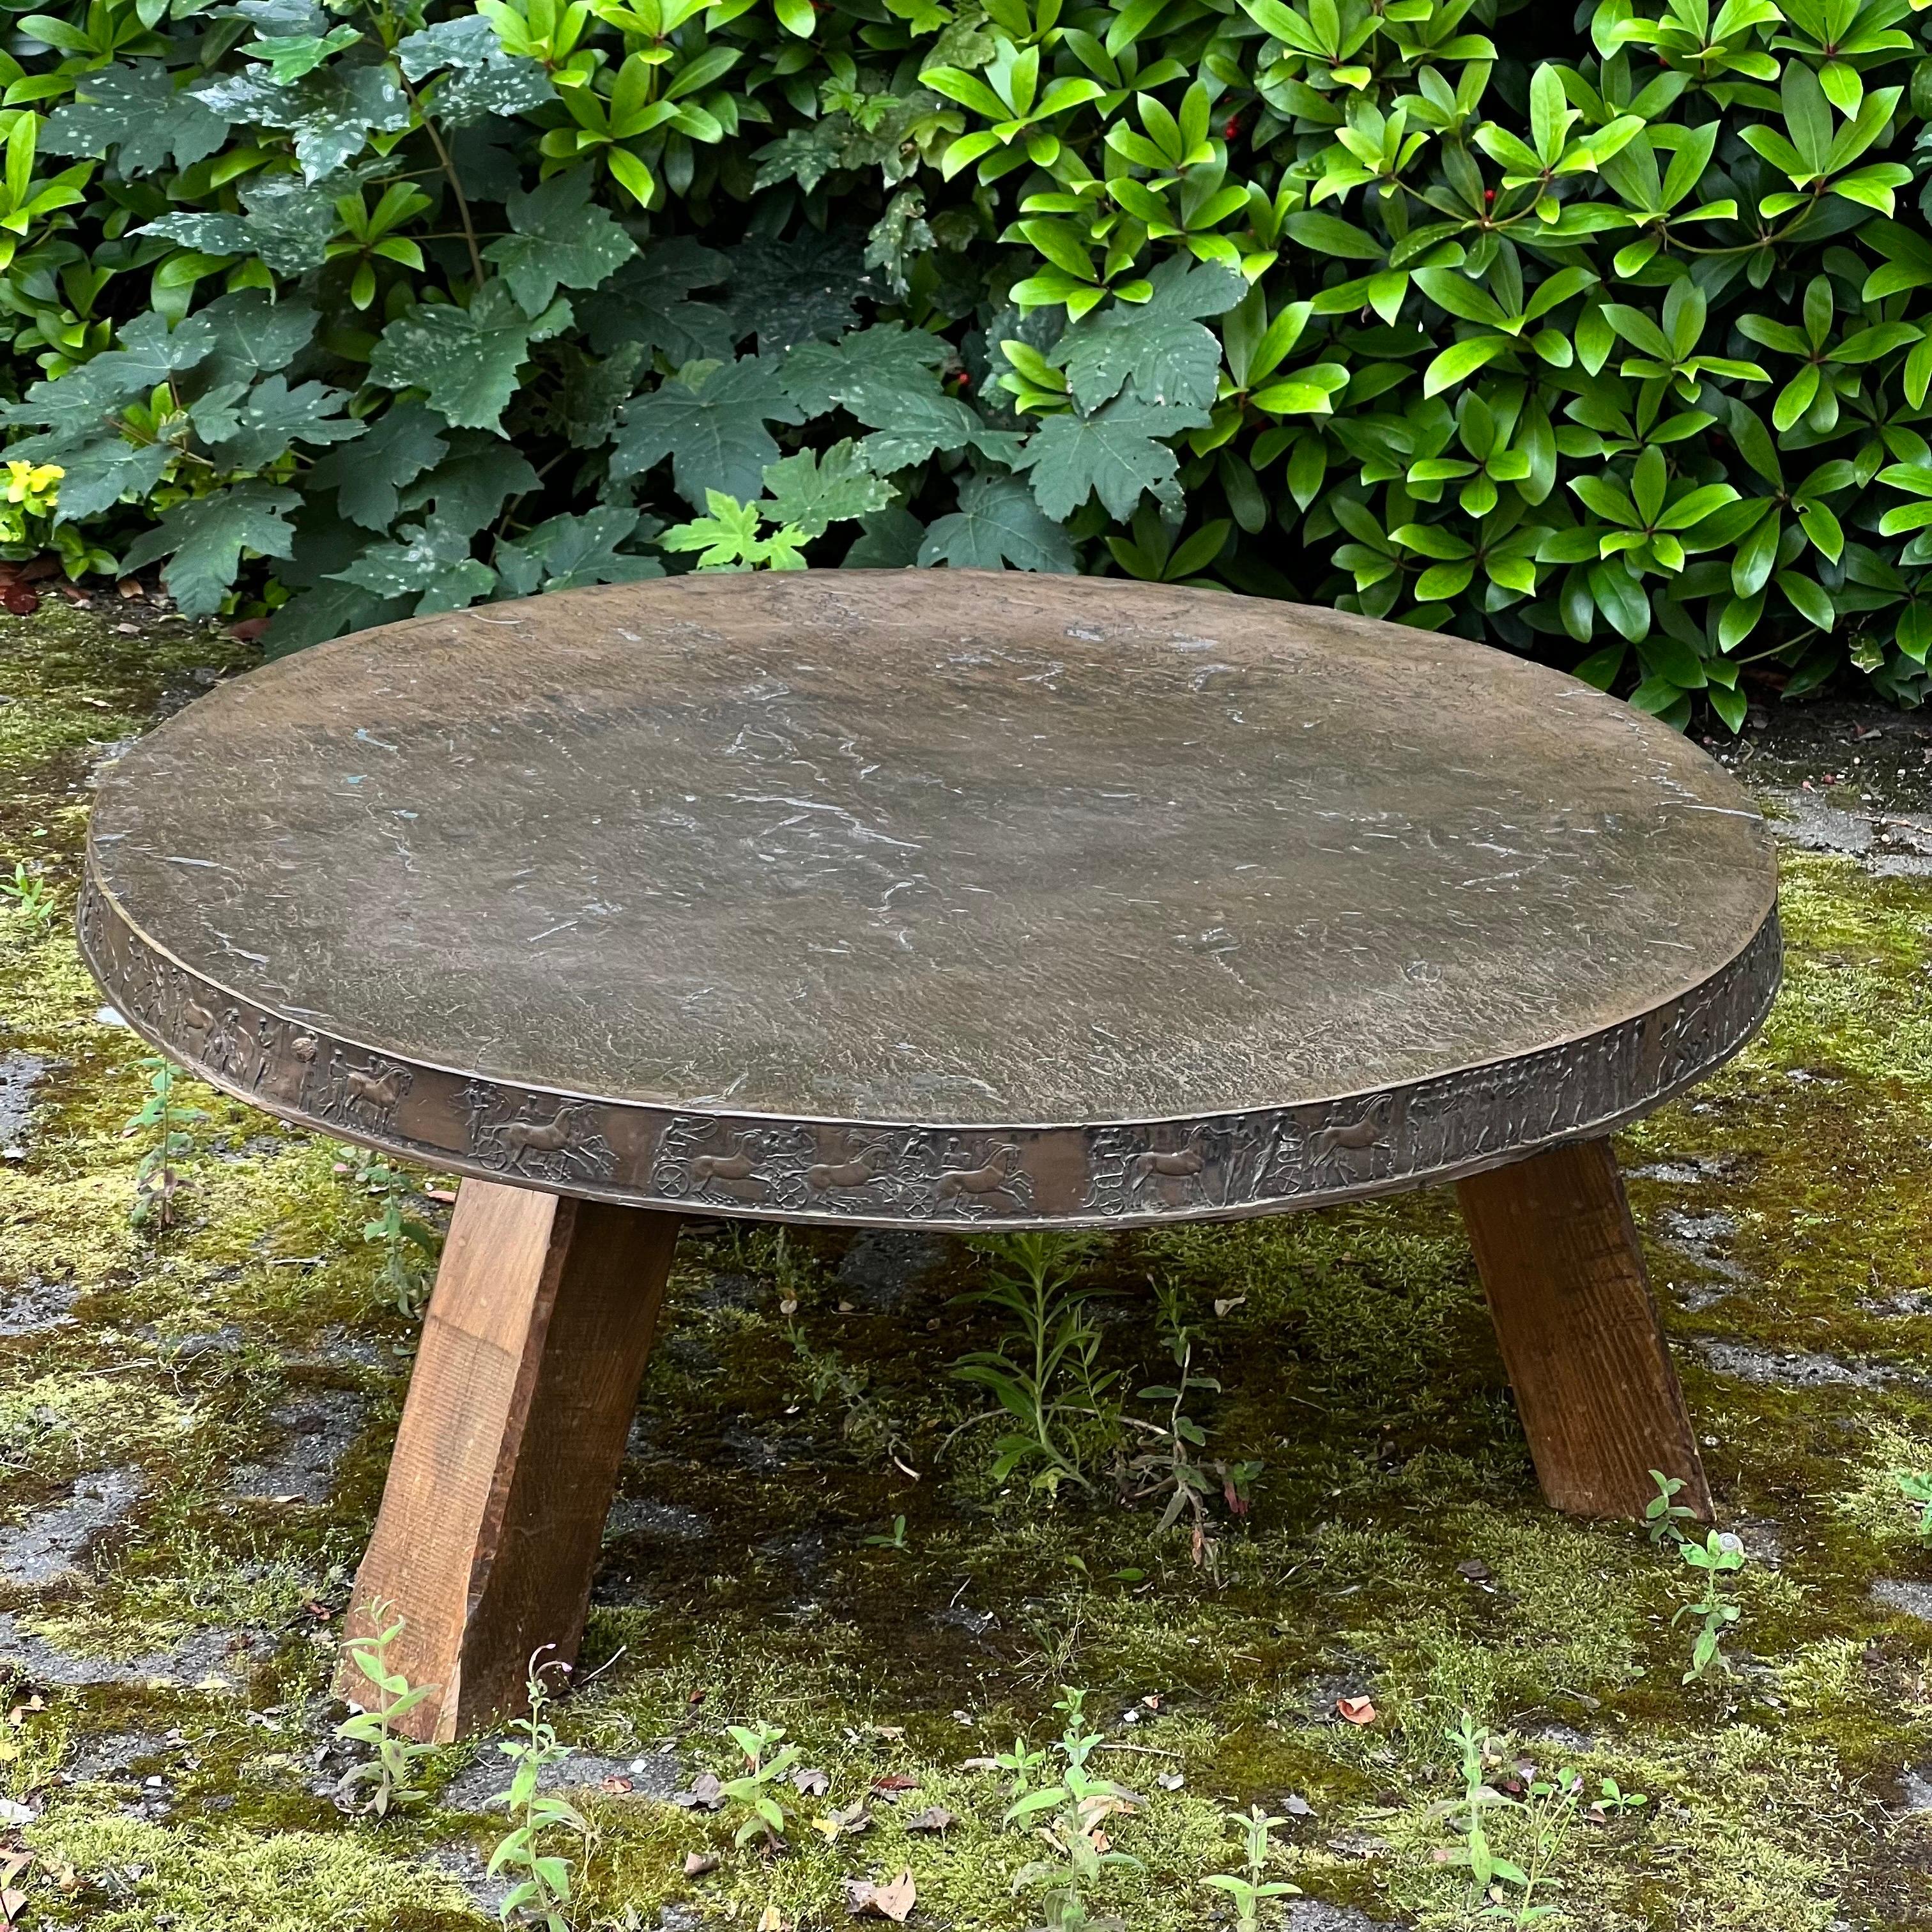 One of a kind round three legged bronze and oak coffee table. Showing elegant antique scenes details on the sides with a detailed textured top. Even the under top is made partially of bronze. Three oak brown stained legs fixed with 4 screws. Not a